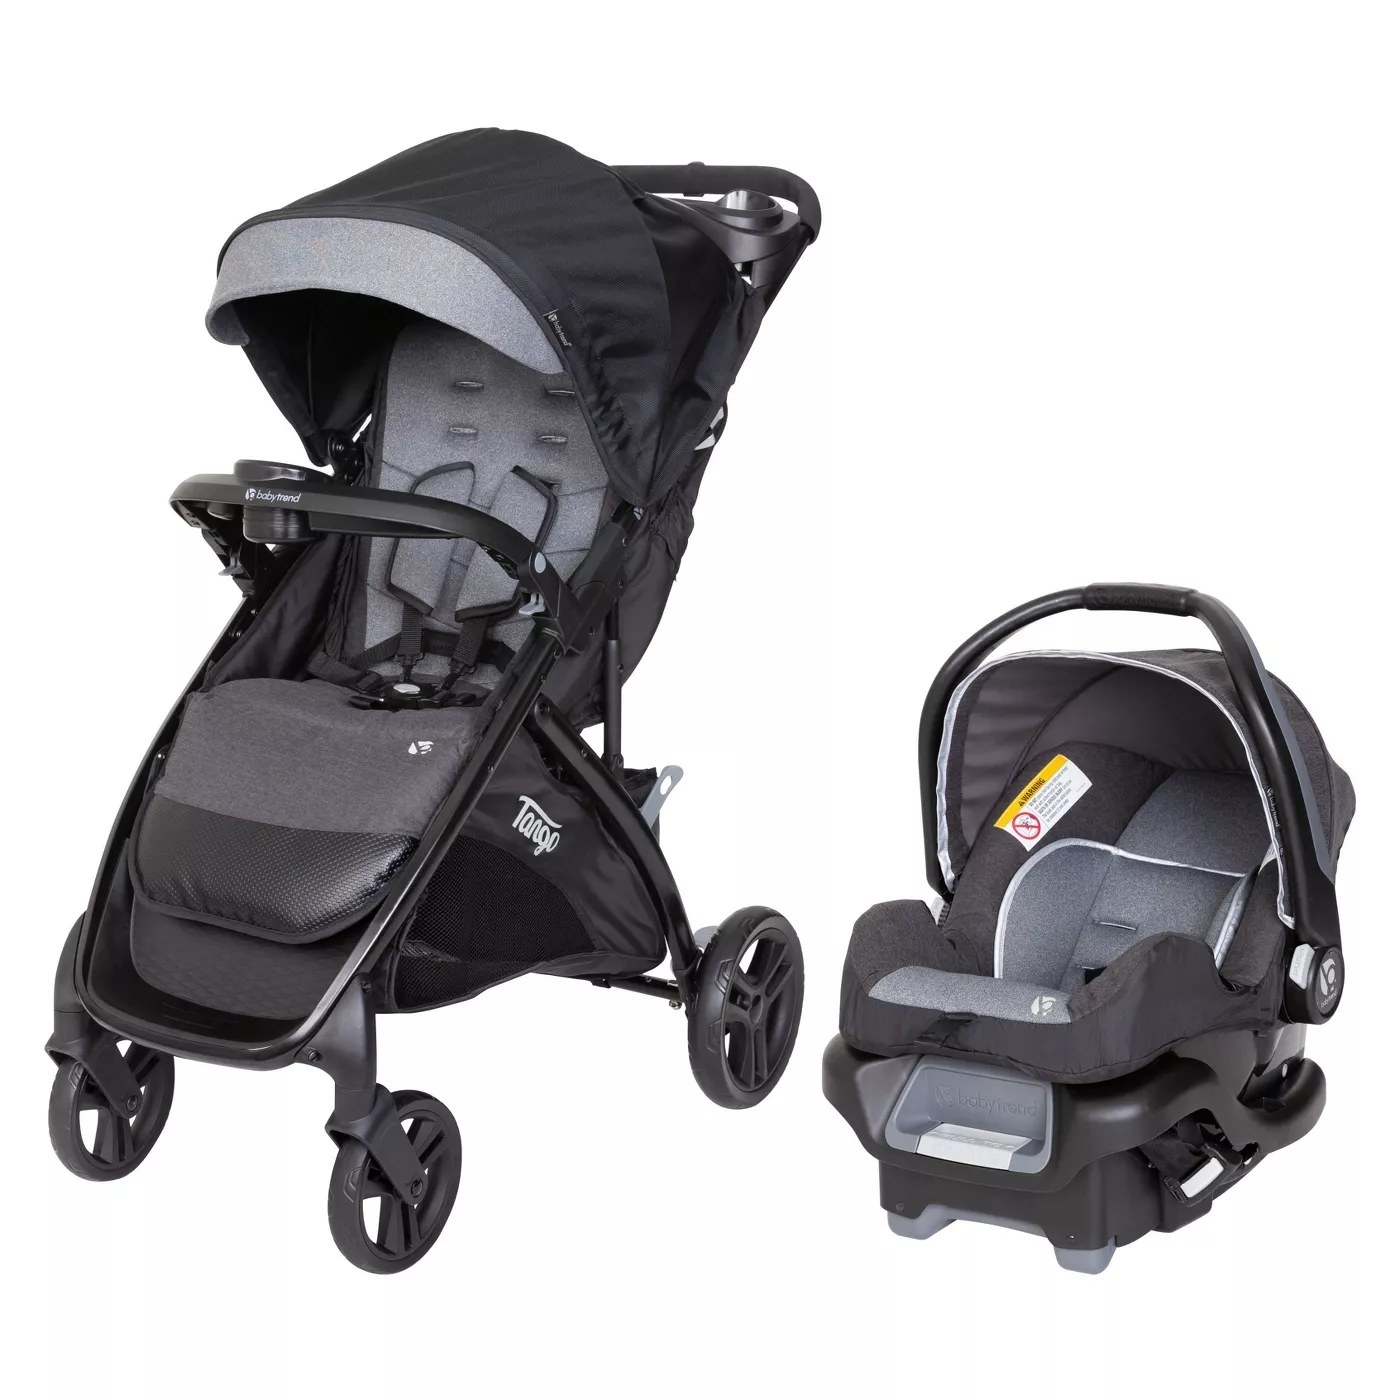 The stroller and the converted car seat